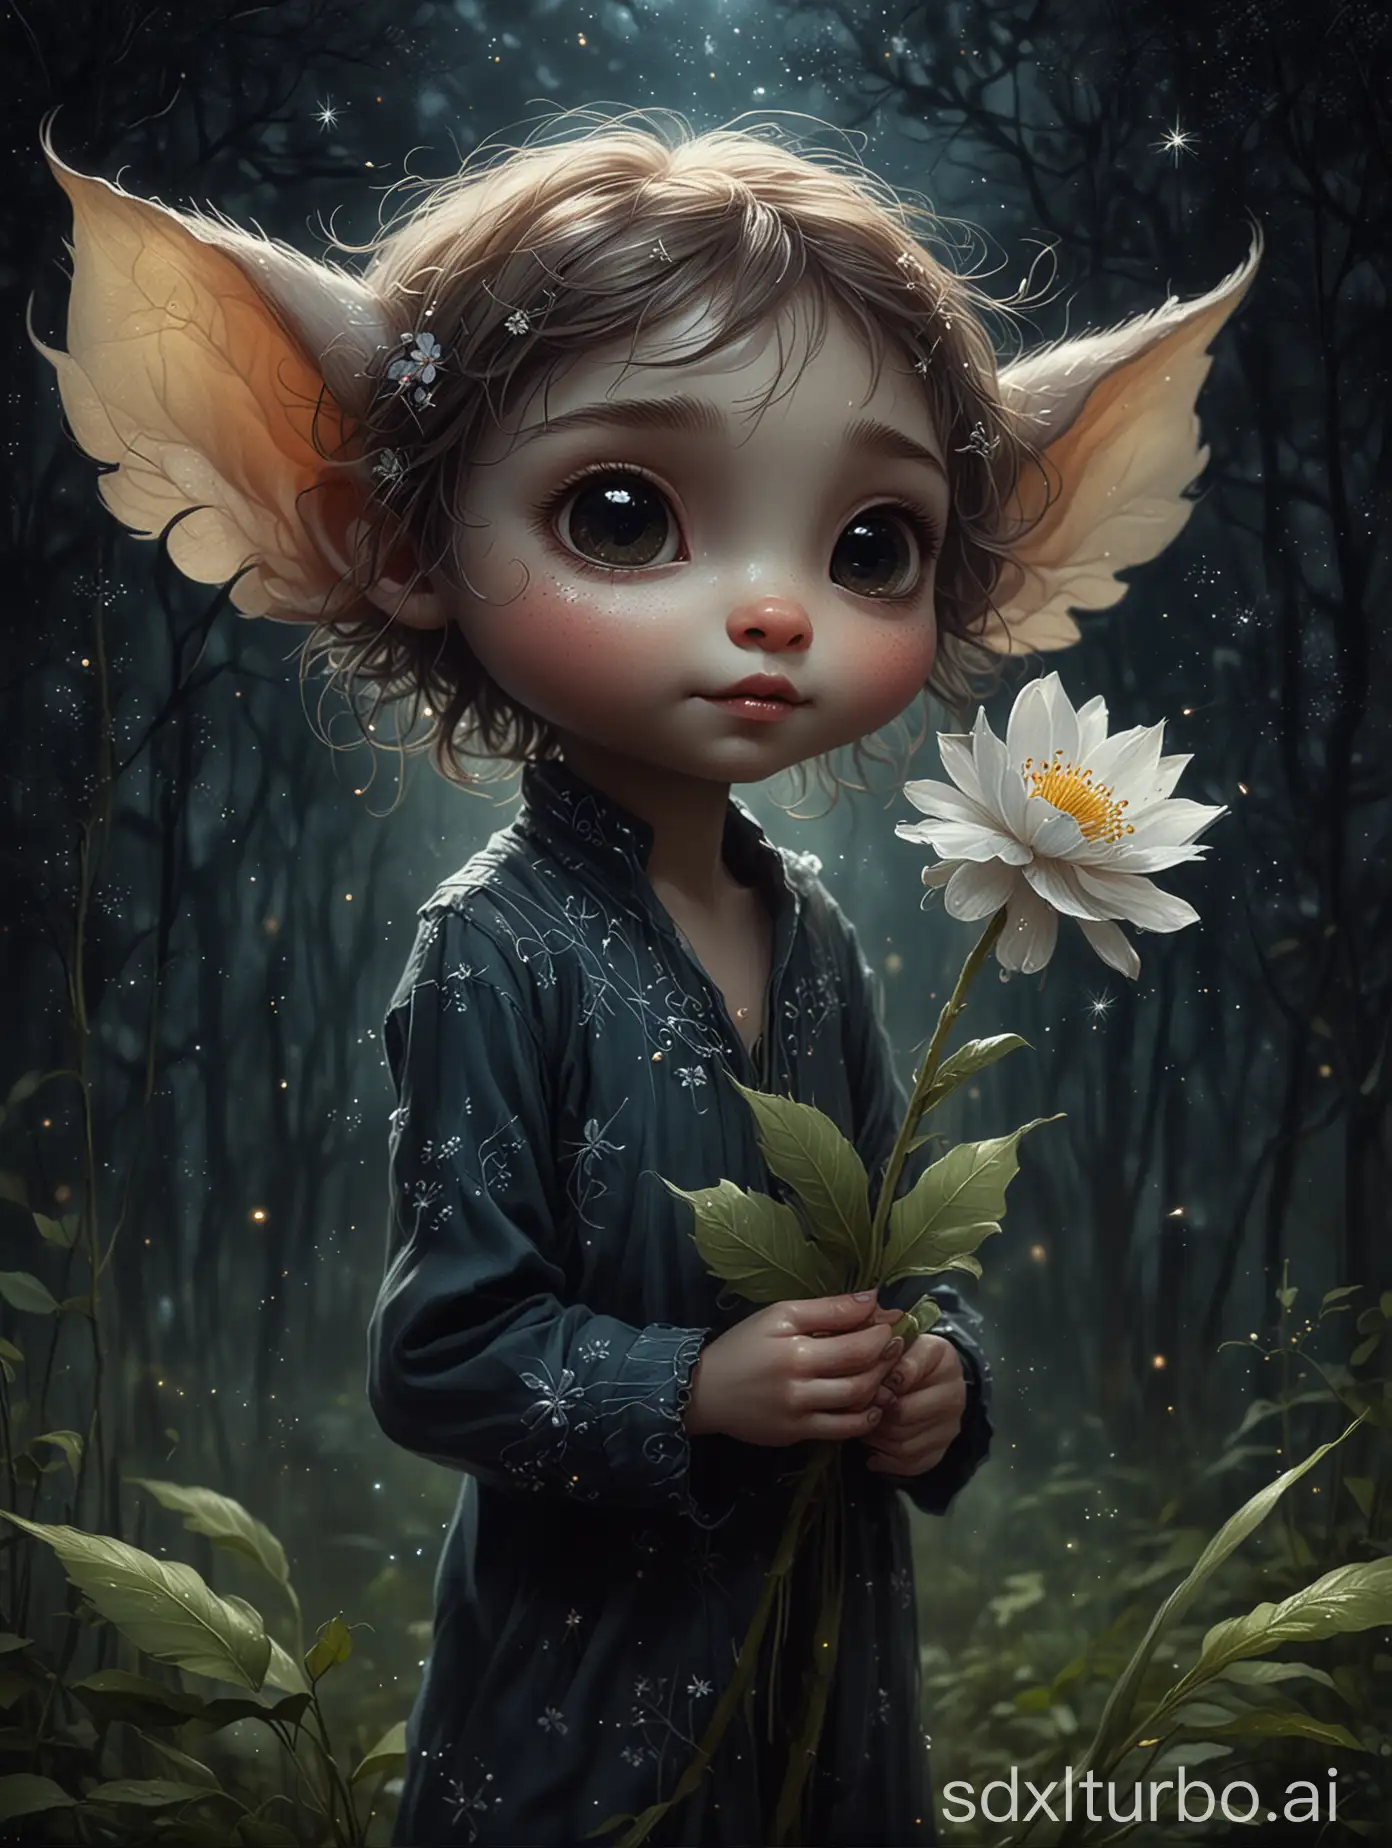 art by mandy disher, art by Charlie Bowater, close-up of a tiny cute scrawny creature holding a flower in a dark forest, starry sky, atmospheric, focus depth, highly detailed oil painting, Artstation